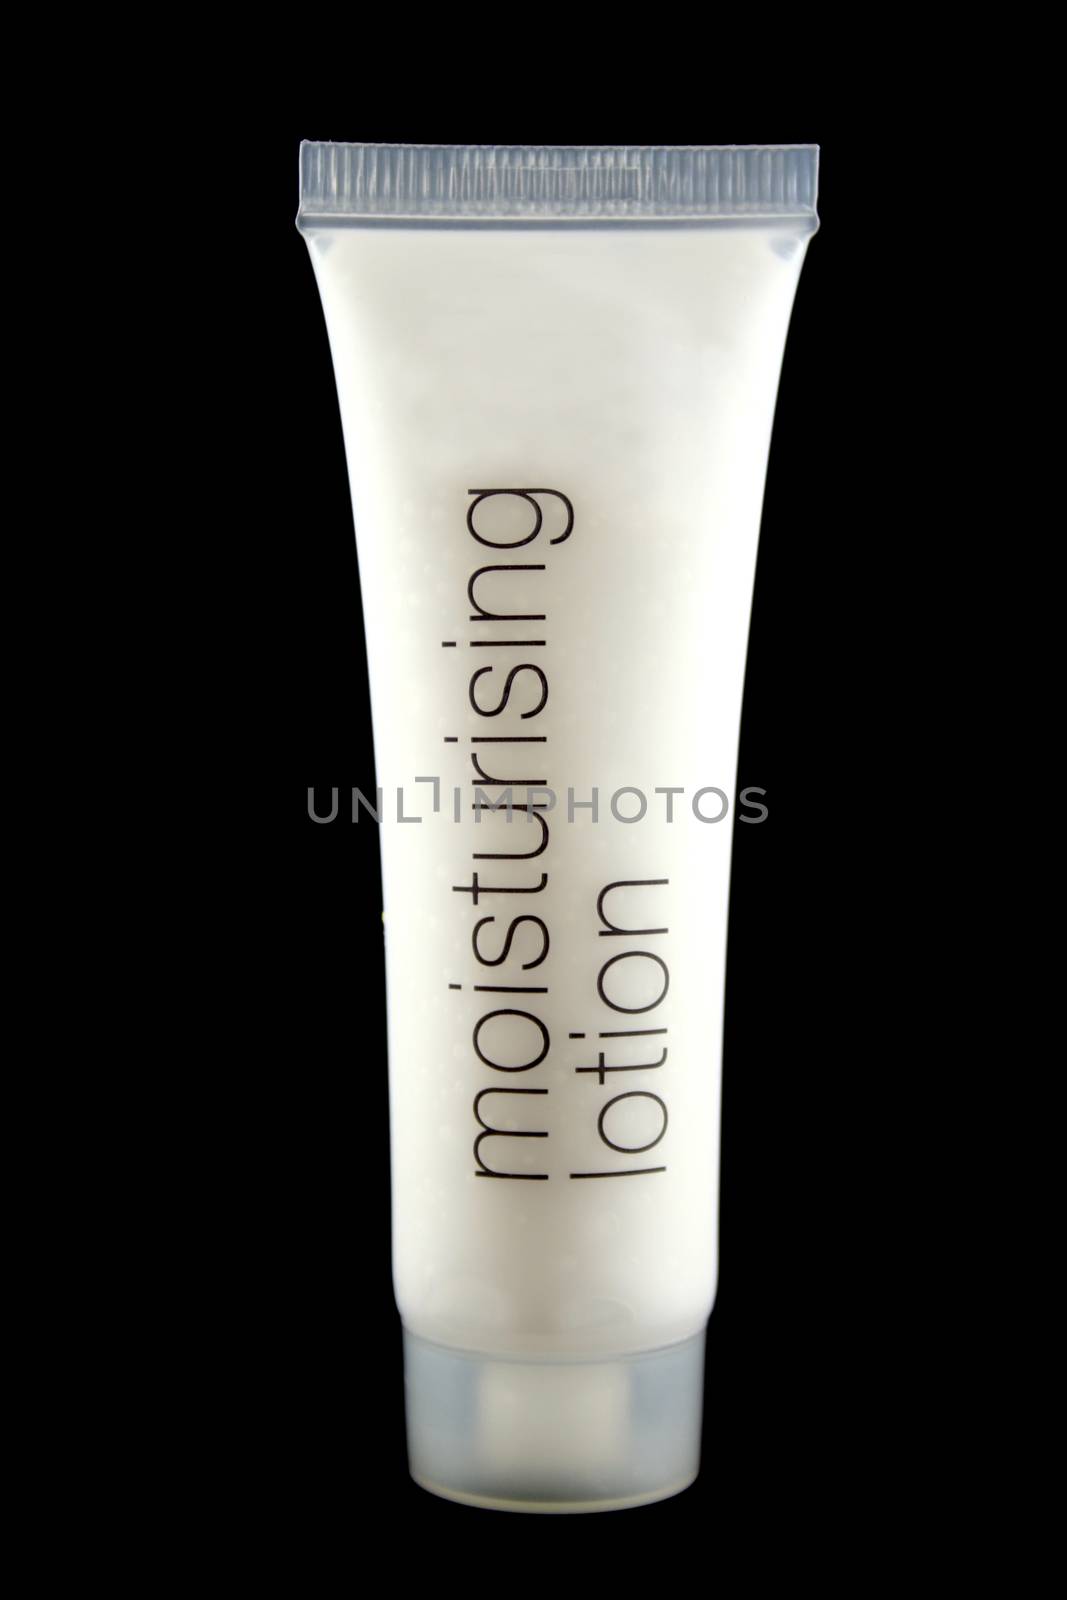 Plastic tube of moisturing lotion ready for use.